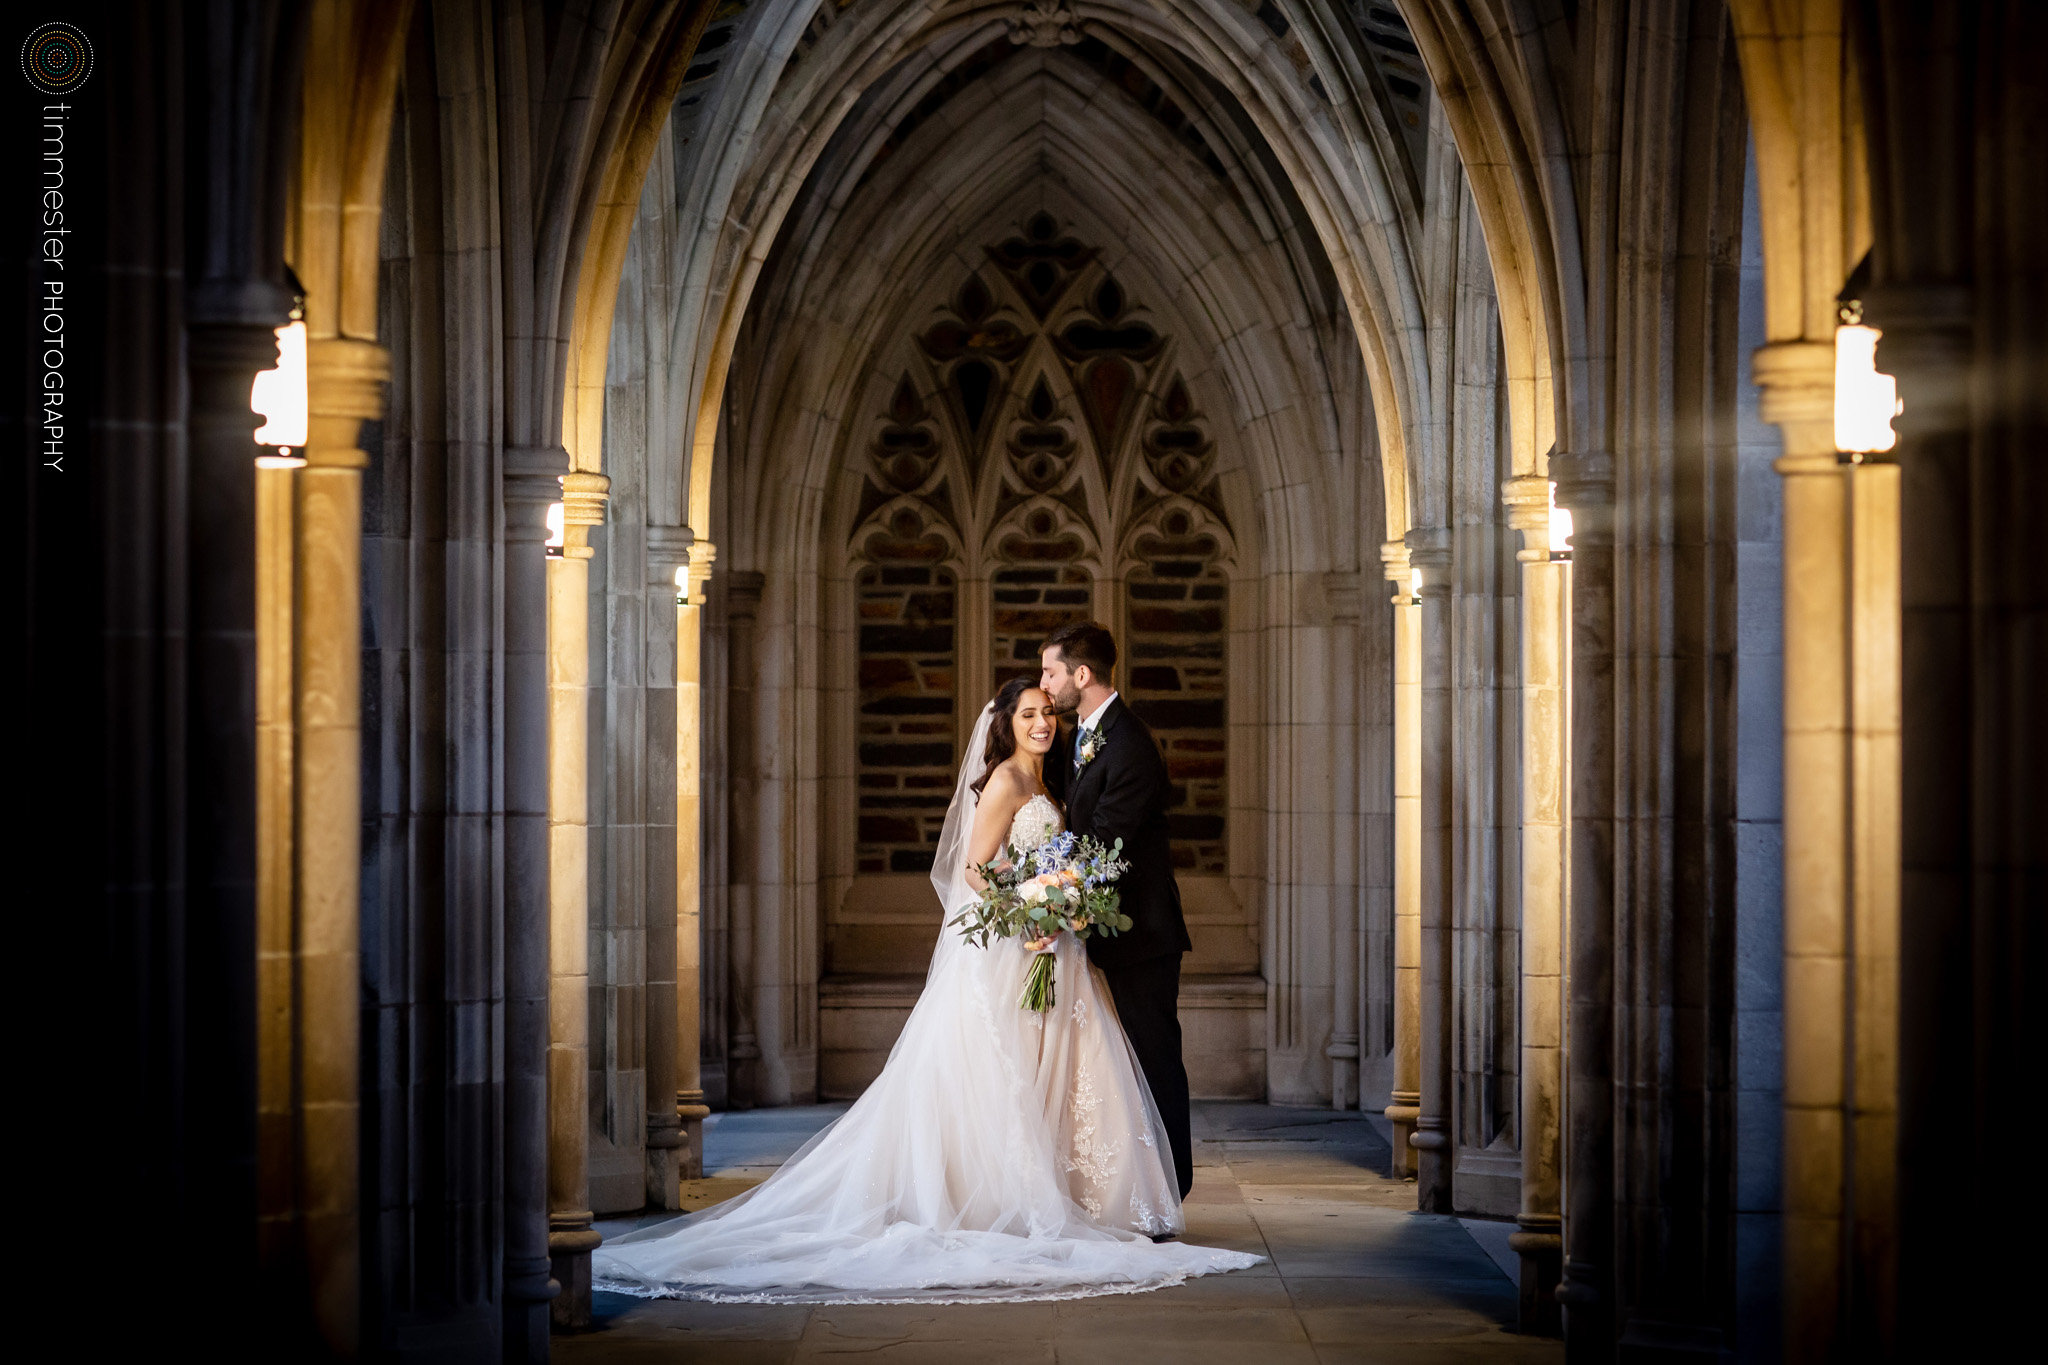 A wedding and bride and groom portraits at Duke University Chapel in Durham, NC